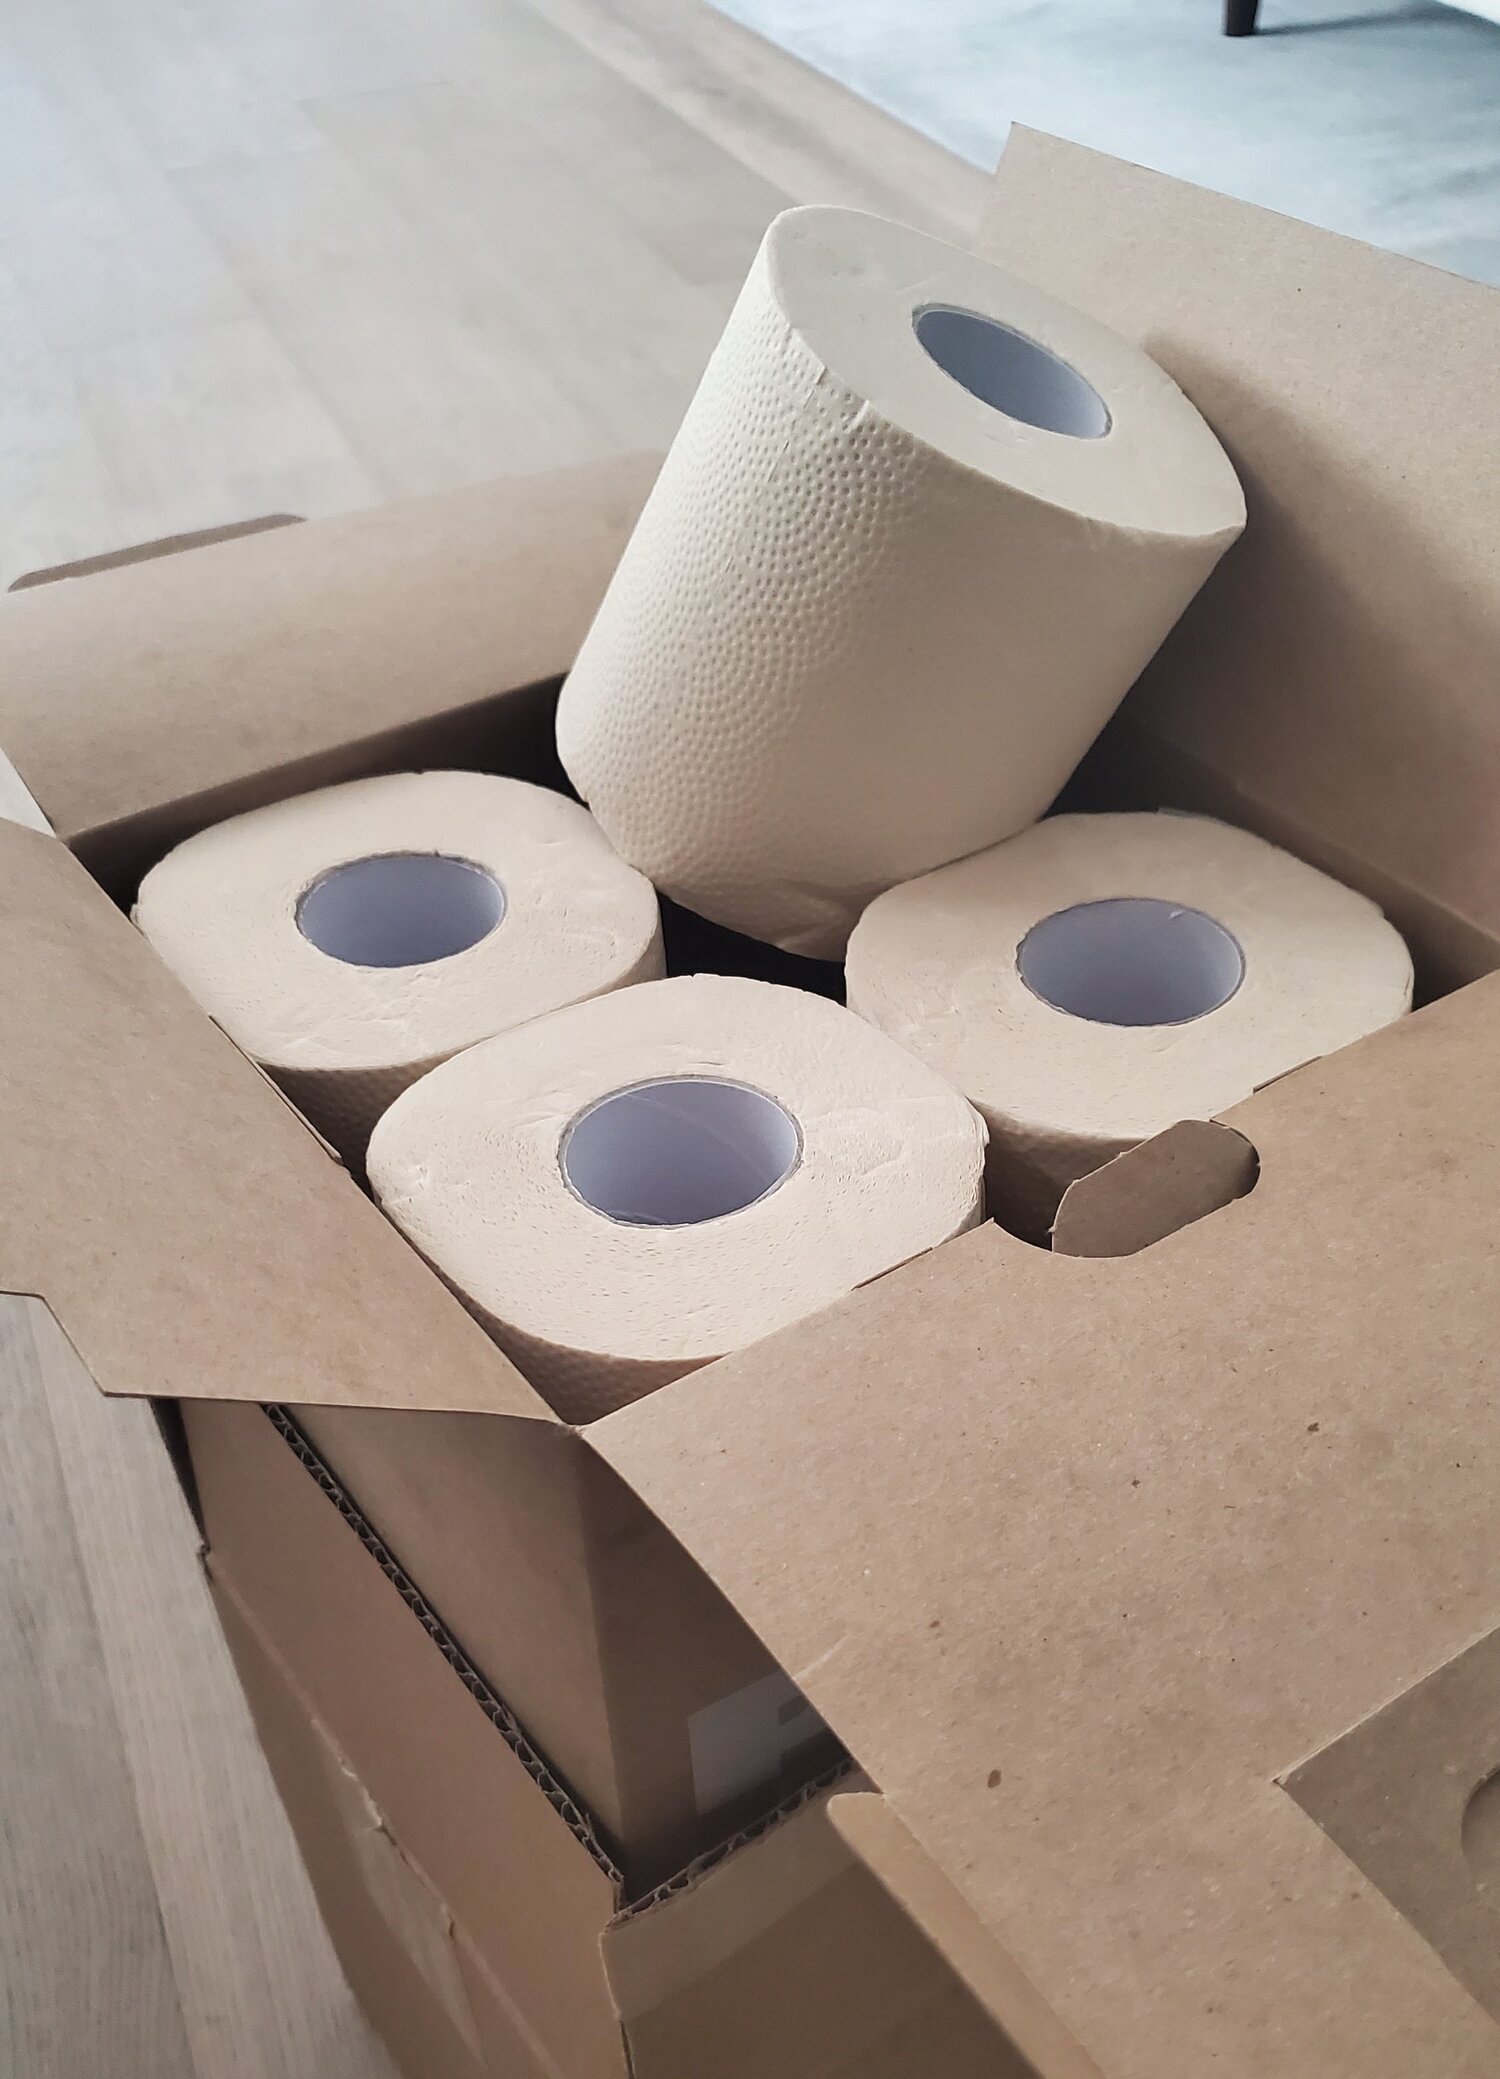 We tried PlantPaper's bamboo toilet paper for a more eco-friendly bathroom  experience. — The Reduce Report